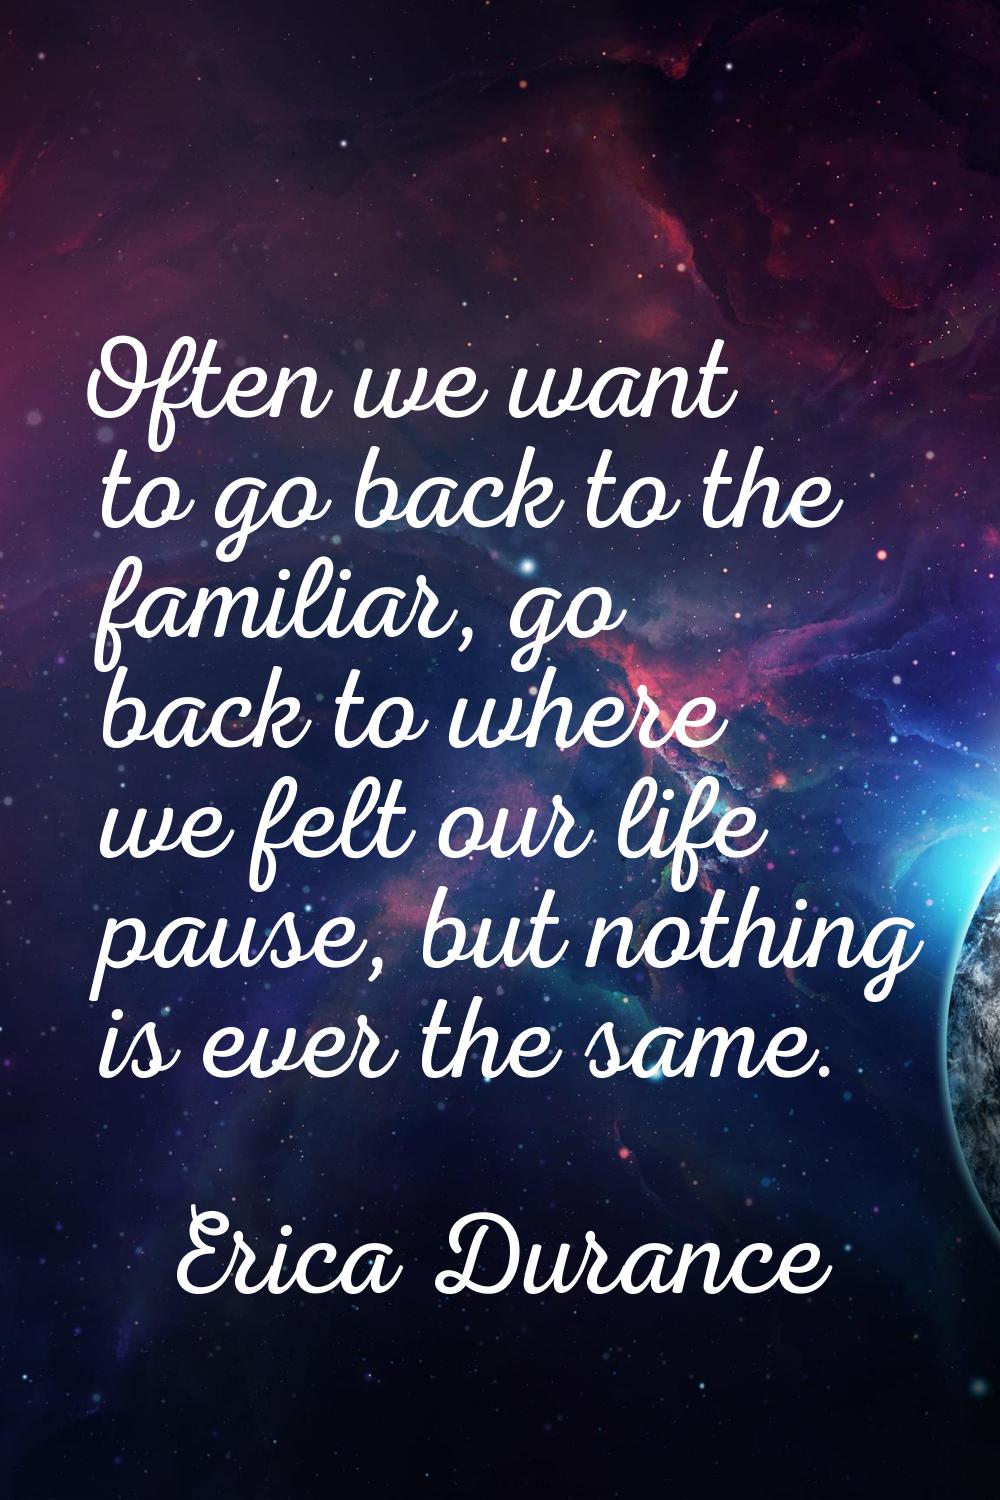 Often we want to go back to the familiar, go back to where we felt our life pause, but nothing is e